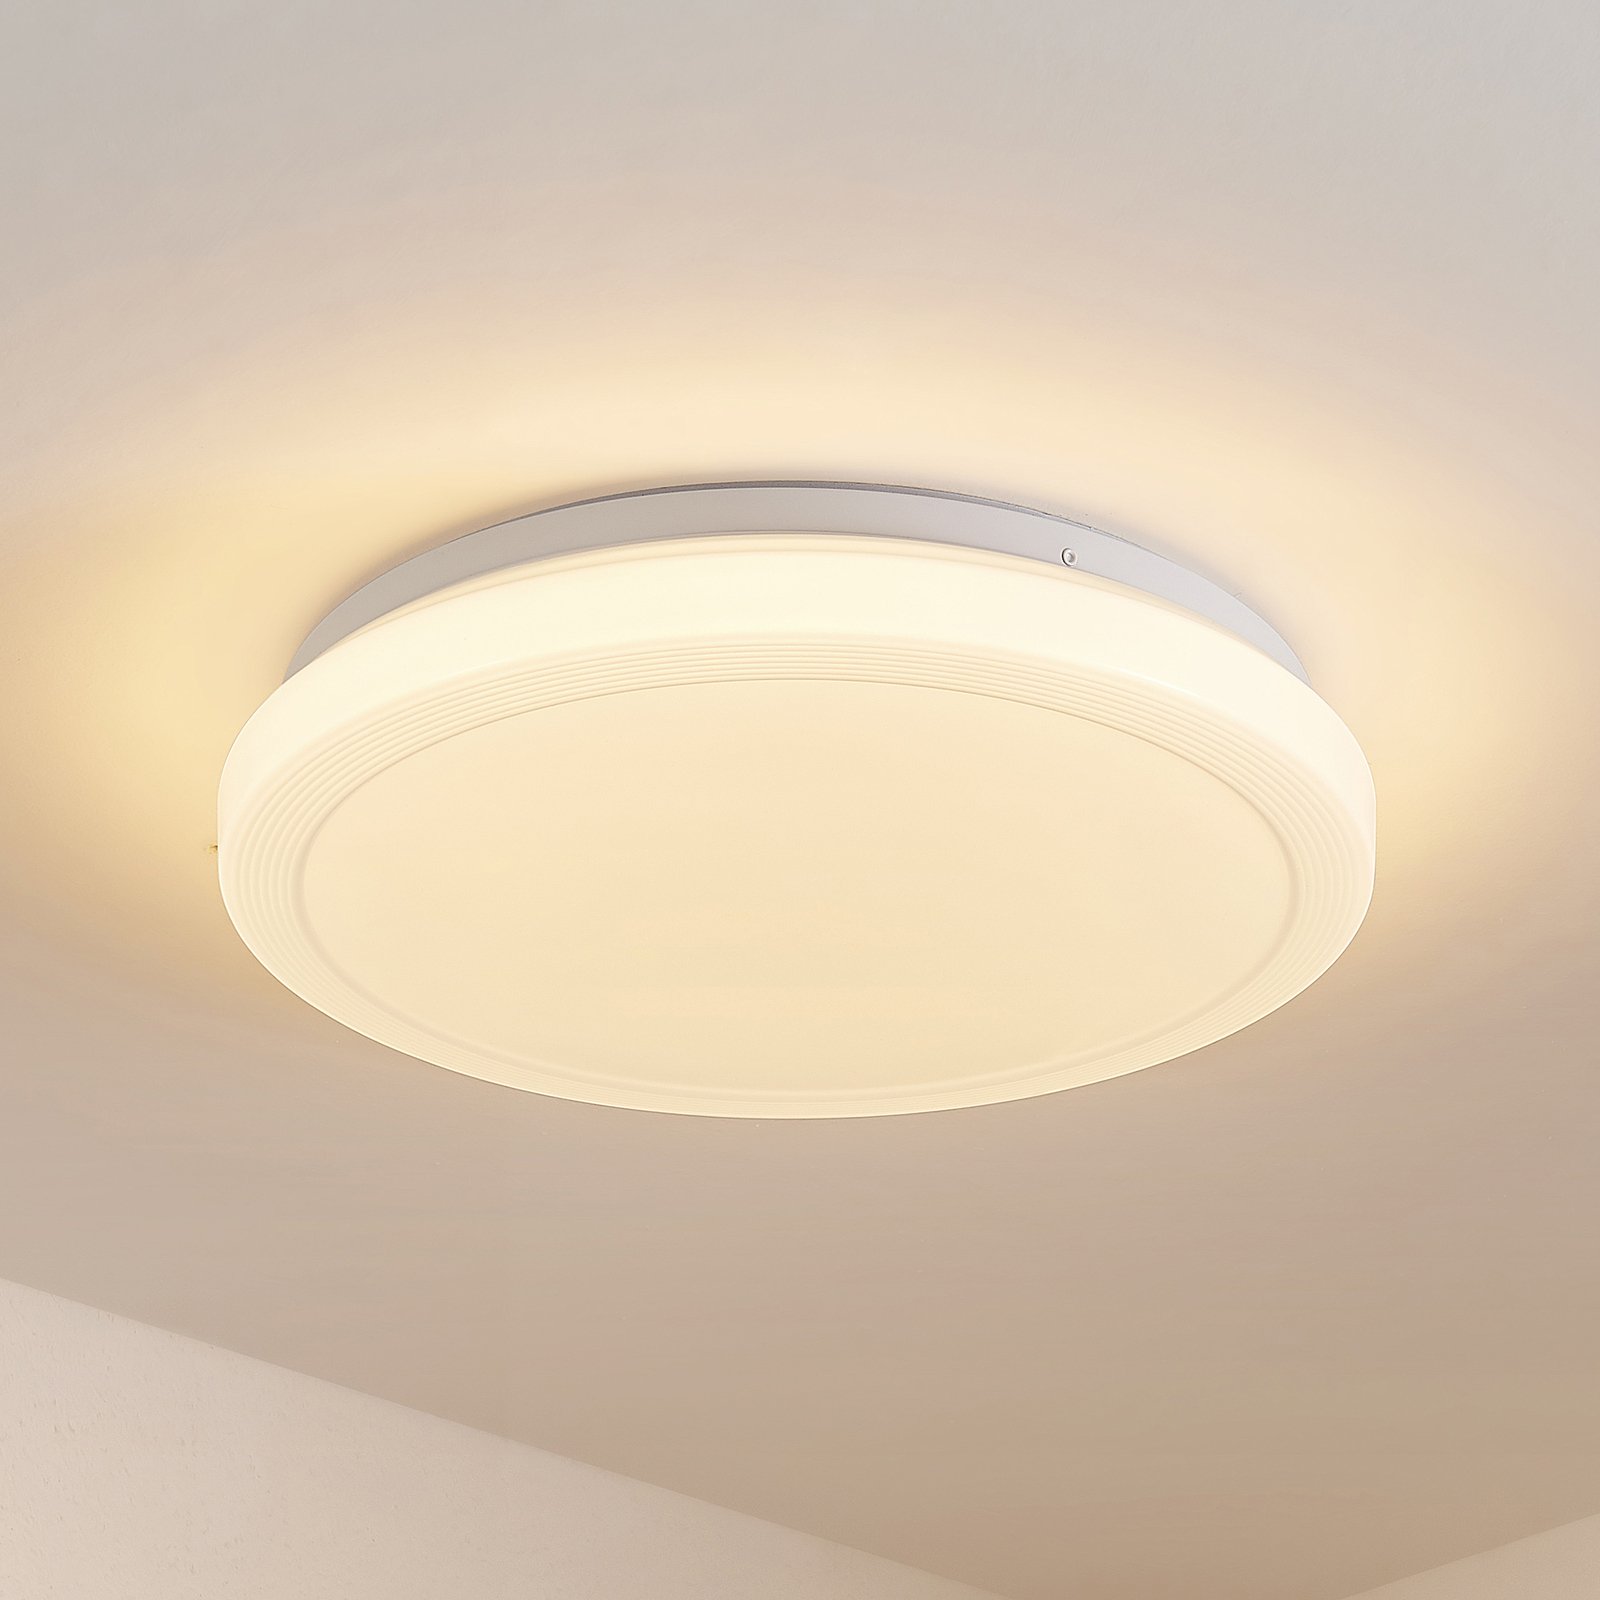 Lindby Dimano LED ceiling light